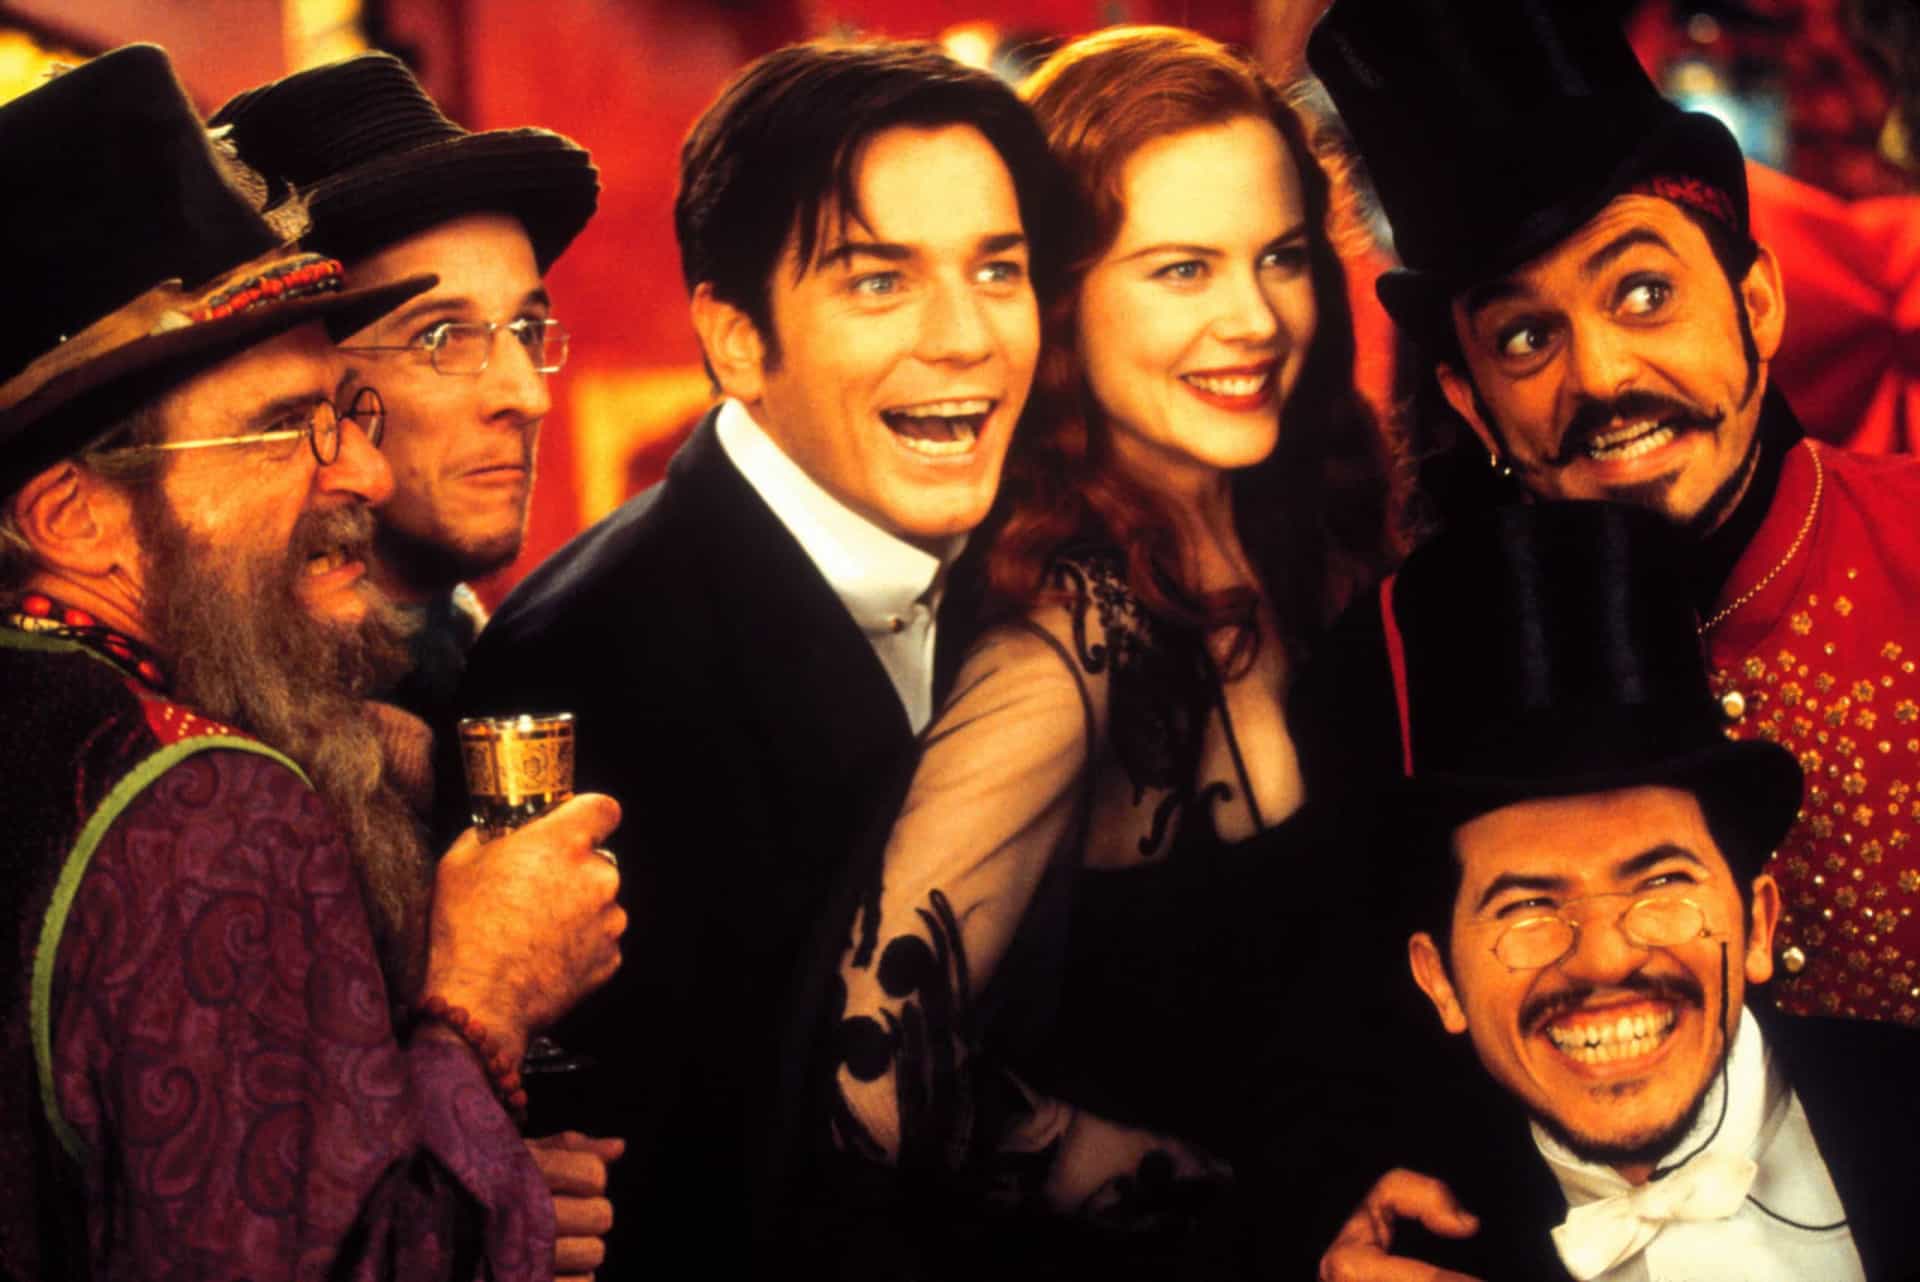 <p>The 2001 film is basically about a writer (Ewan McGregor) who falls for a Moulin Rouge performer (Nicole Kidman).</p>